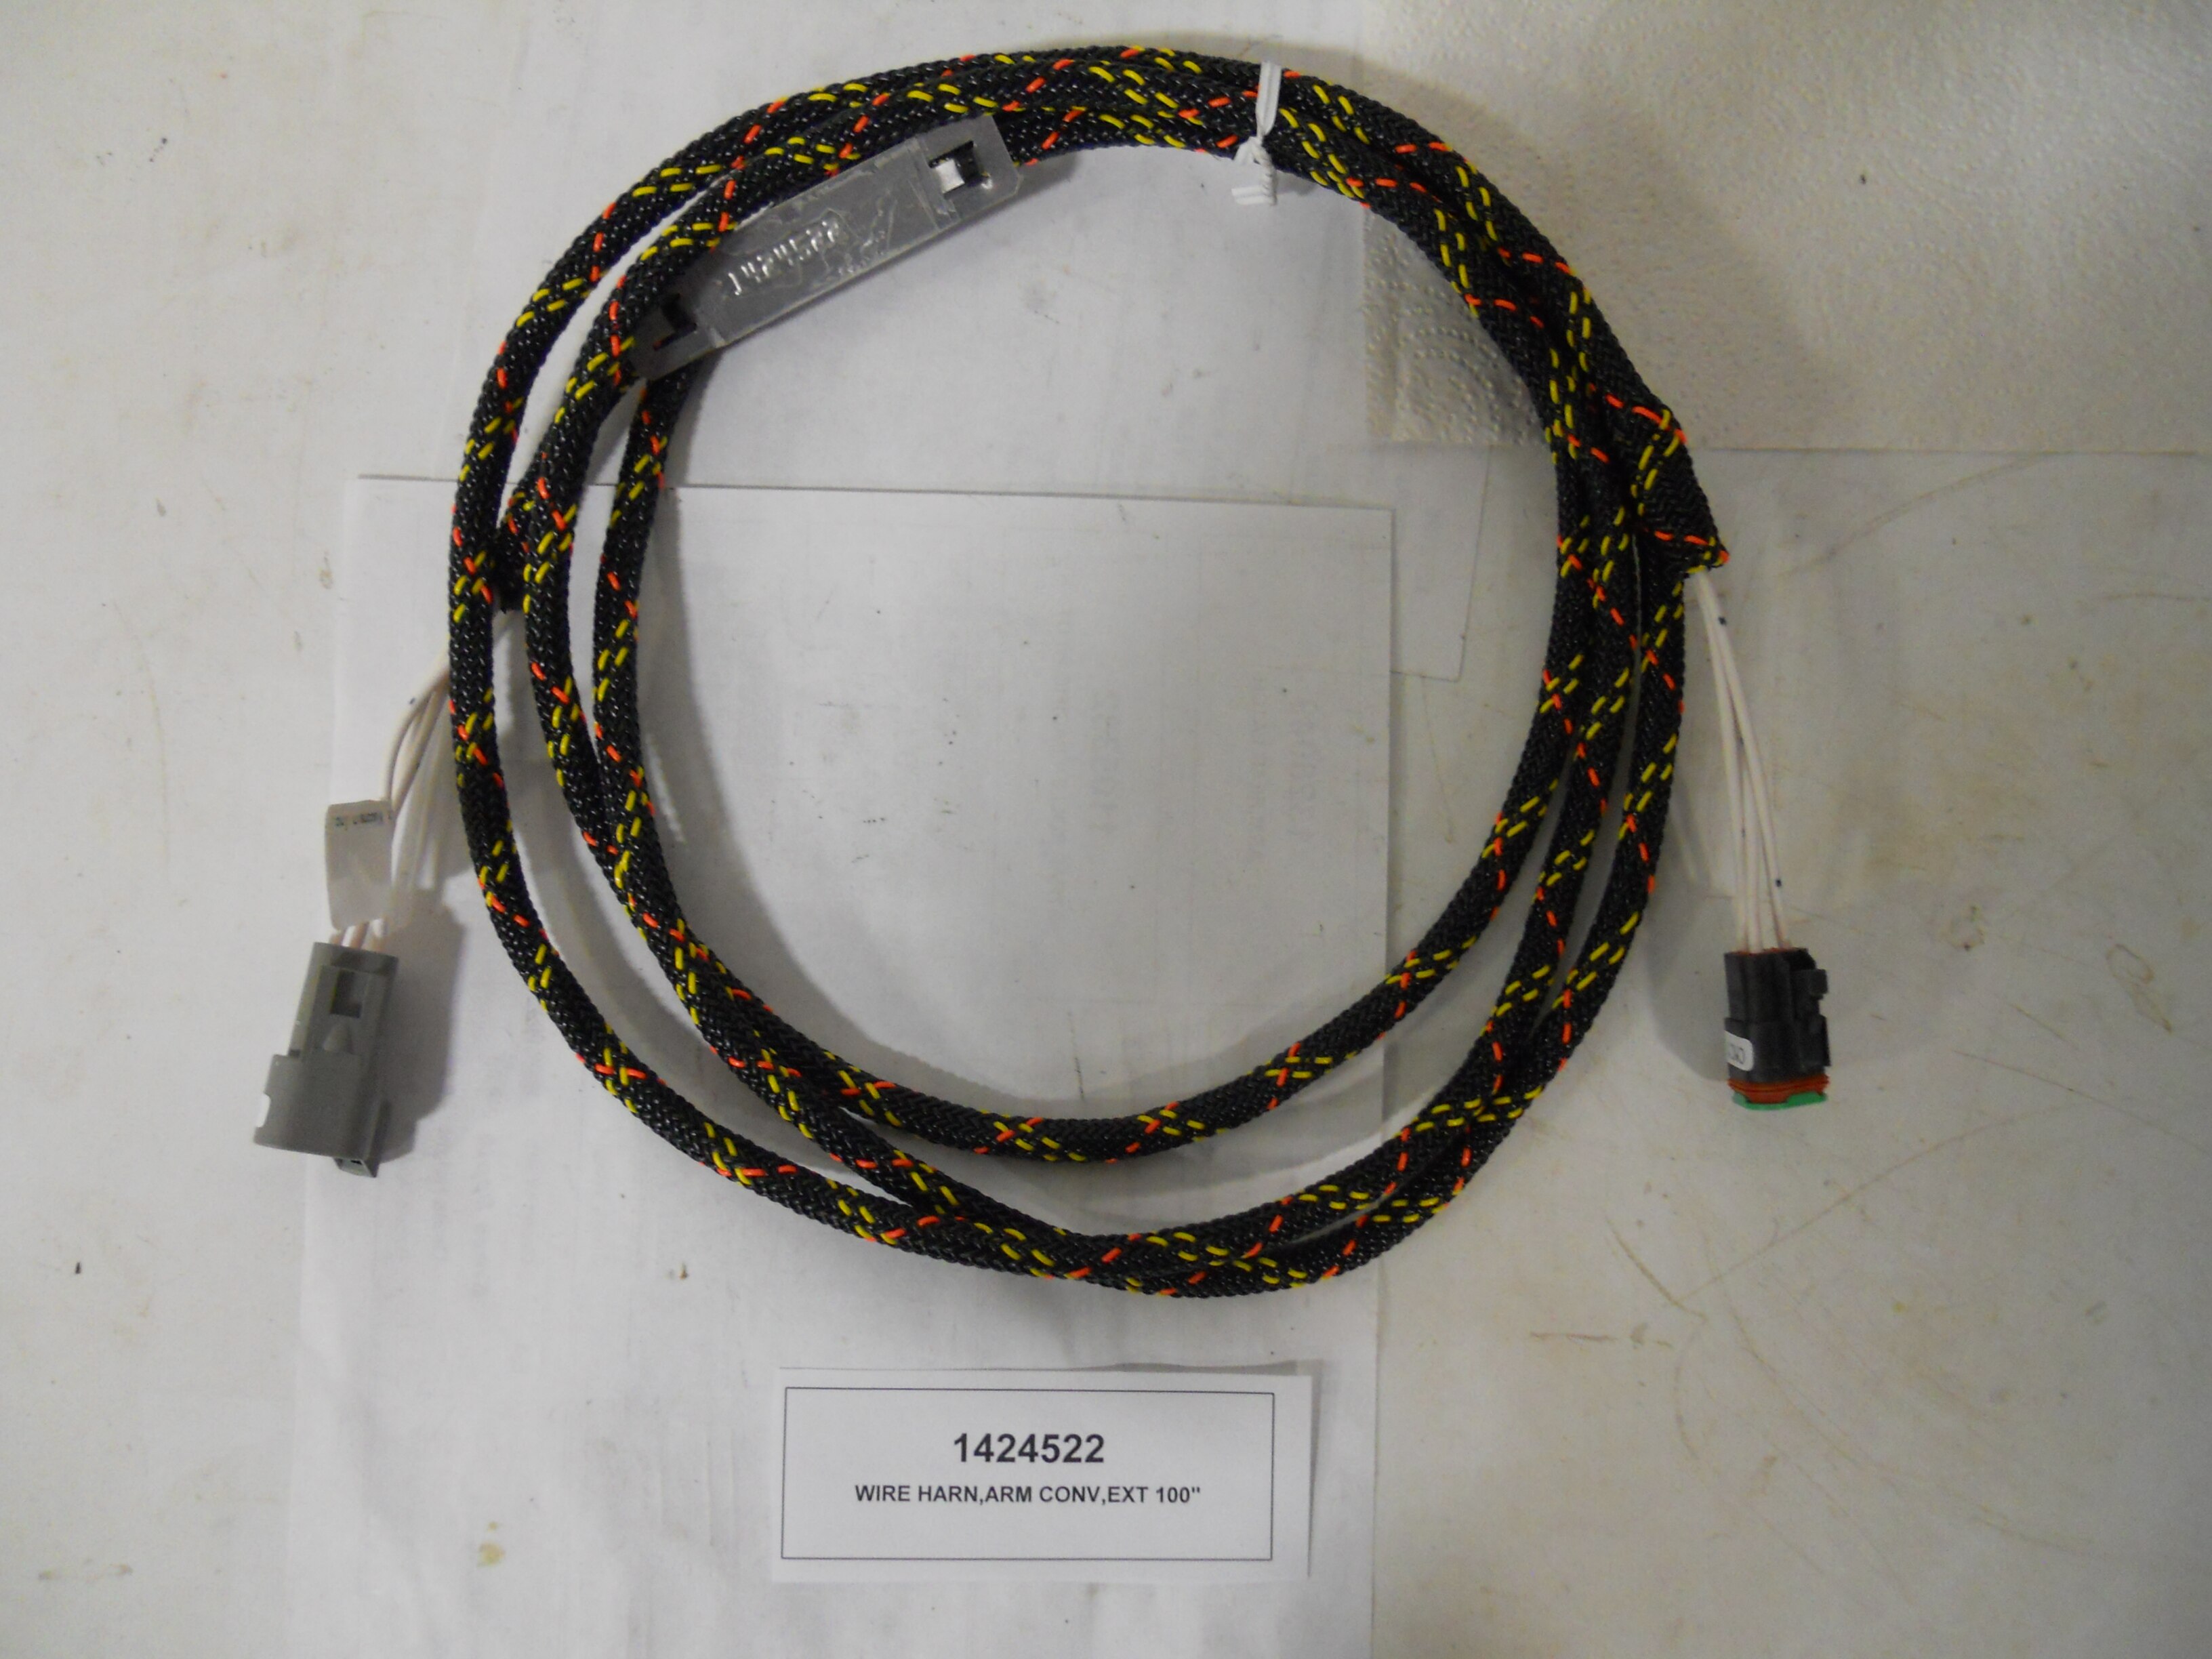 WIRE HARN,ARM CONV,EXT 100"